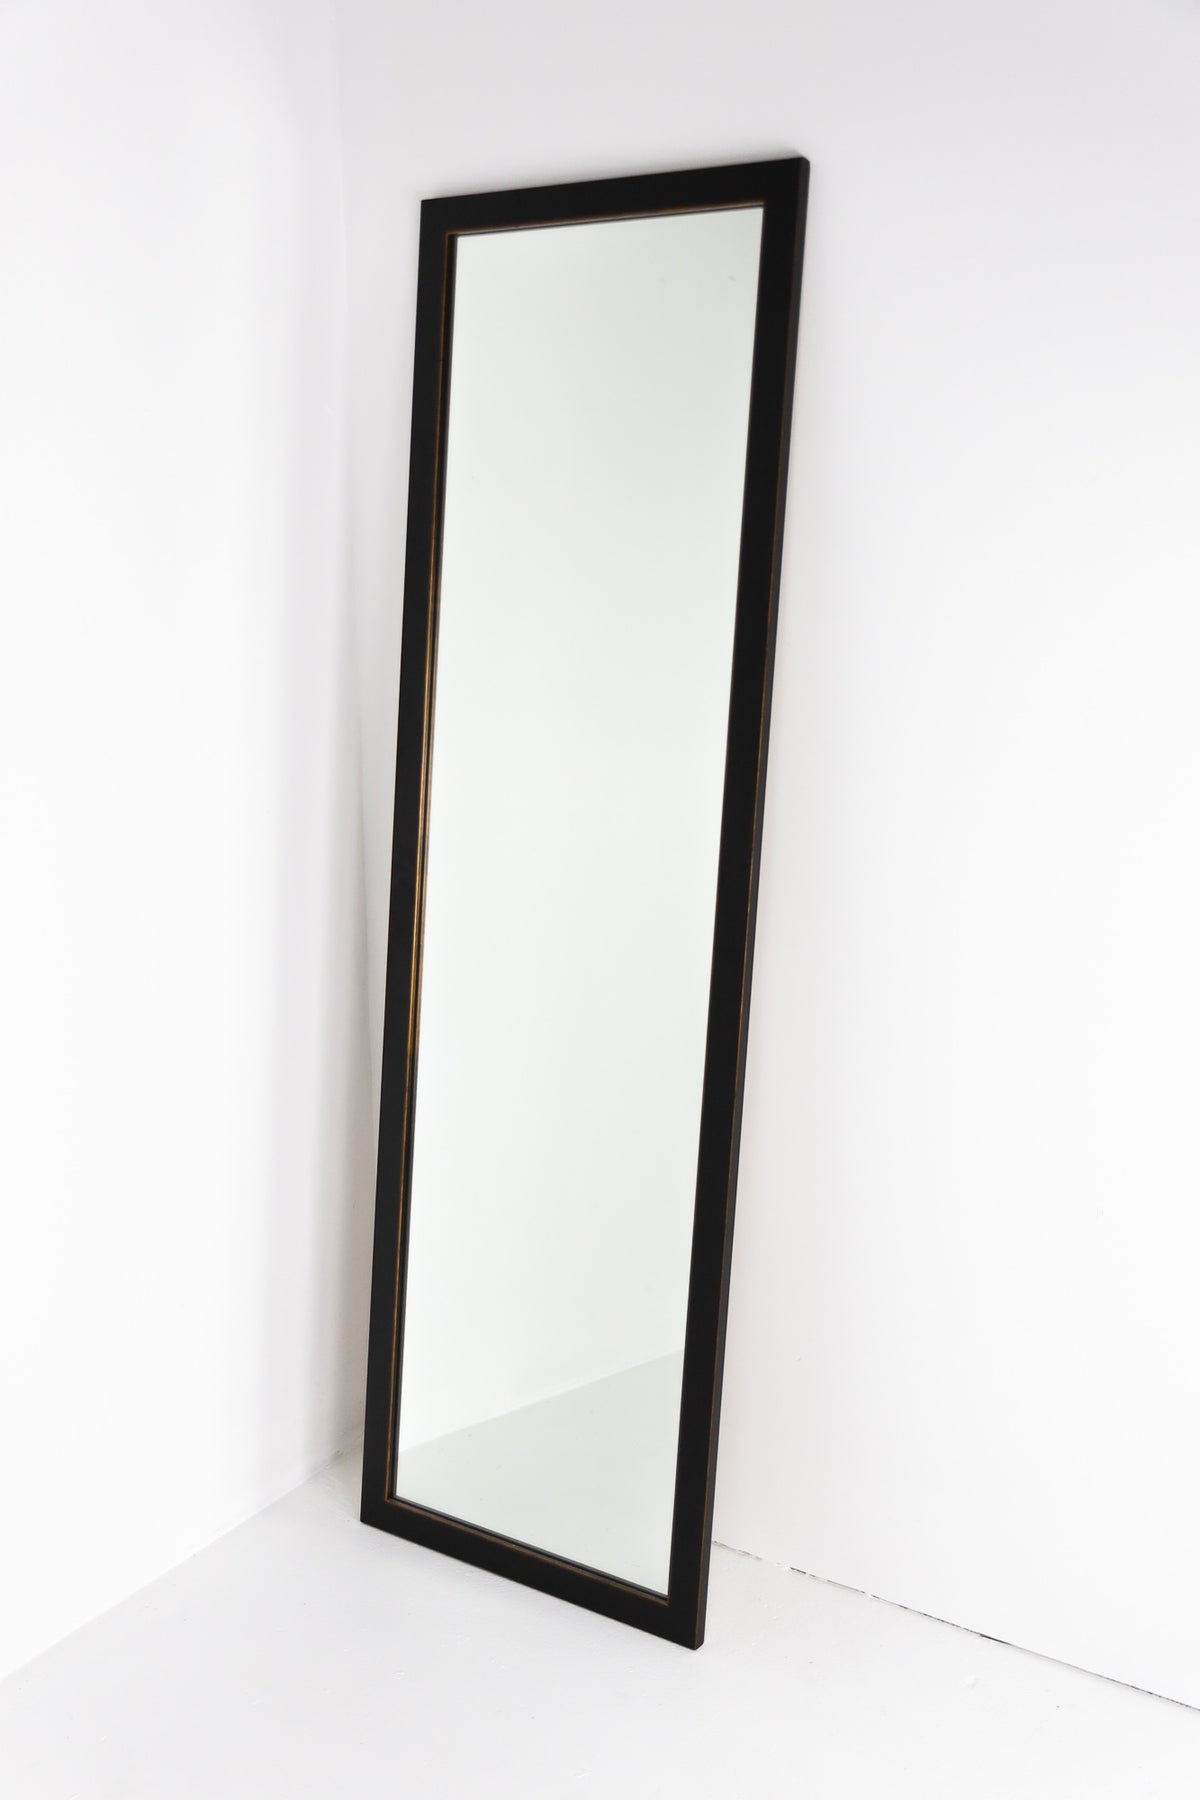 Mirror in our black gold trimmed frame